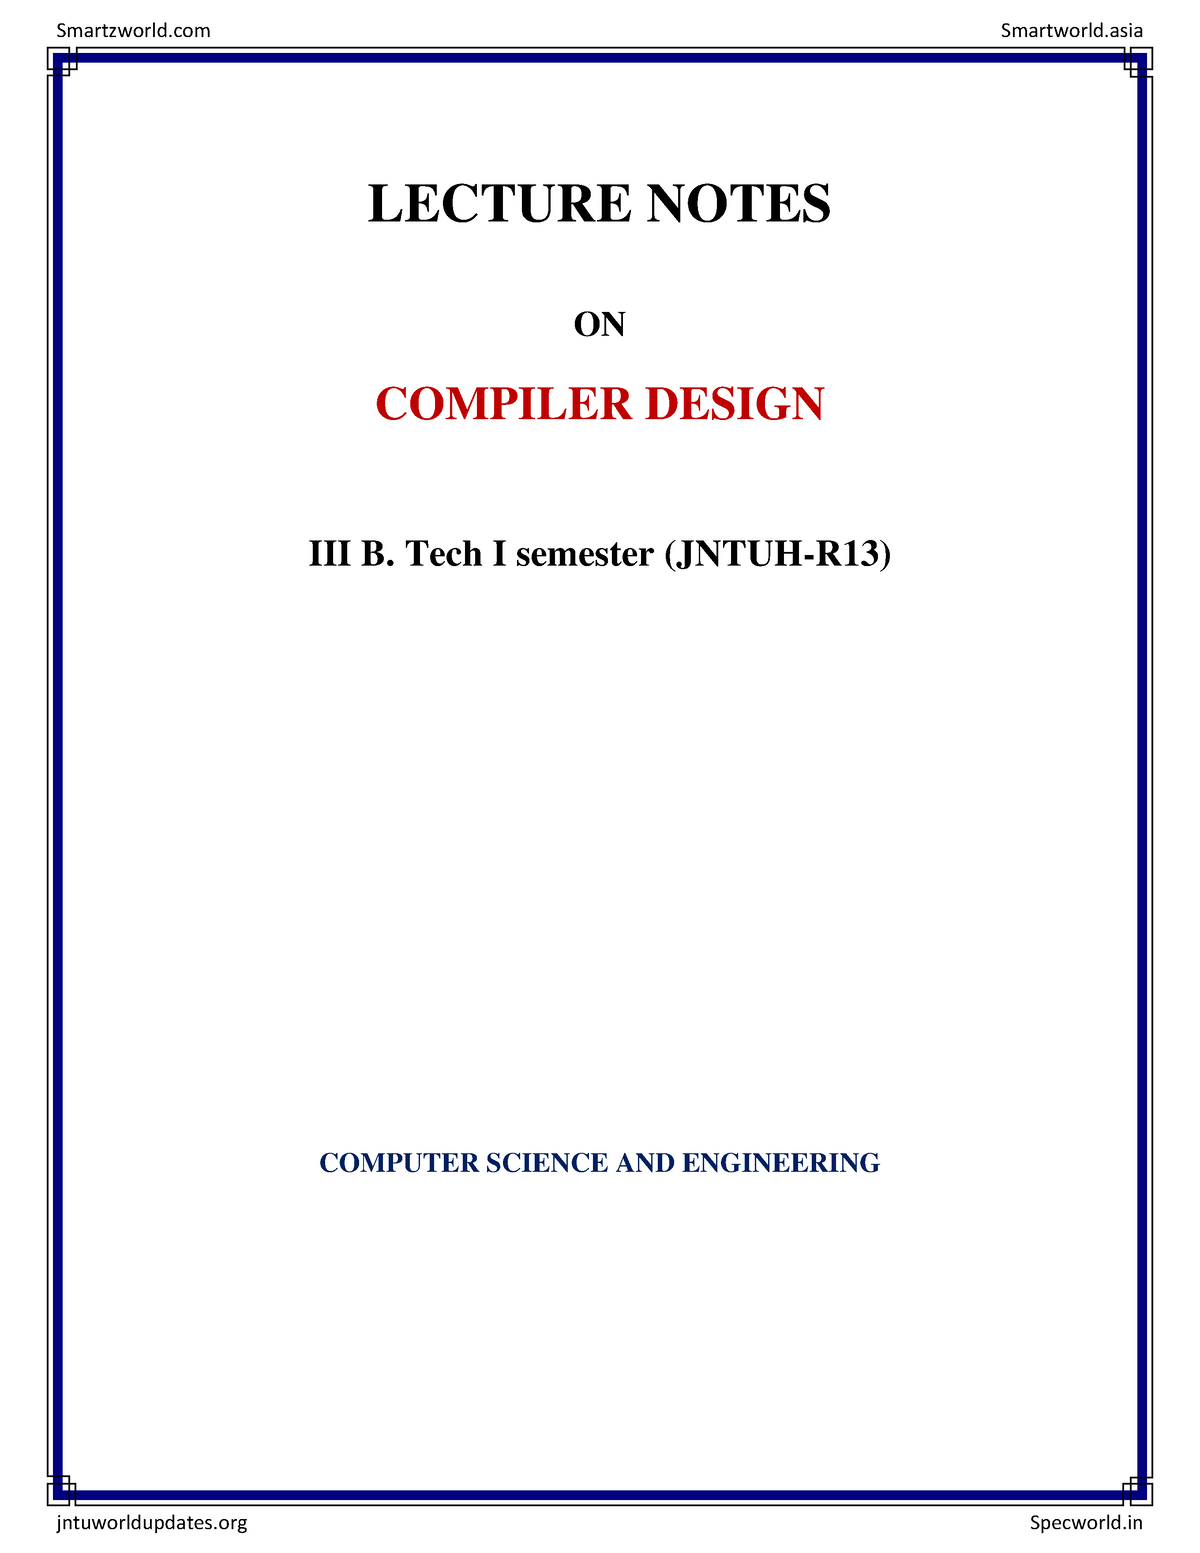 Compiler Design U1 - Vivek Chaudhary - LECTURE NOTES ON COMPILER DESIGN ...